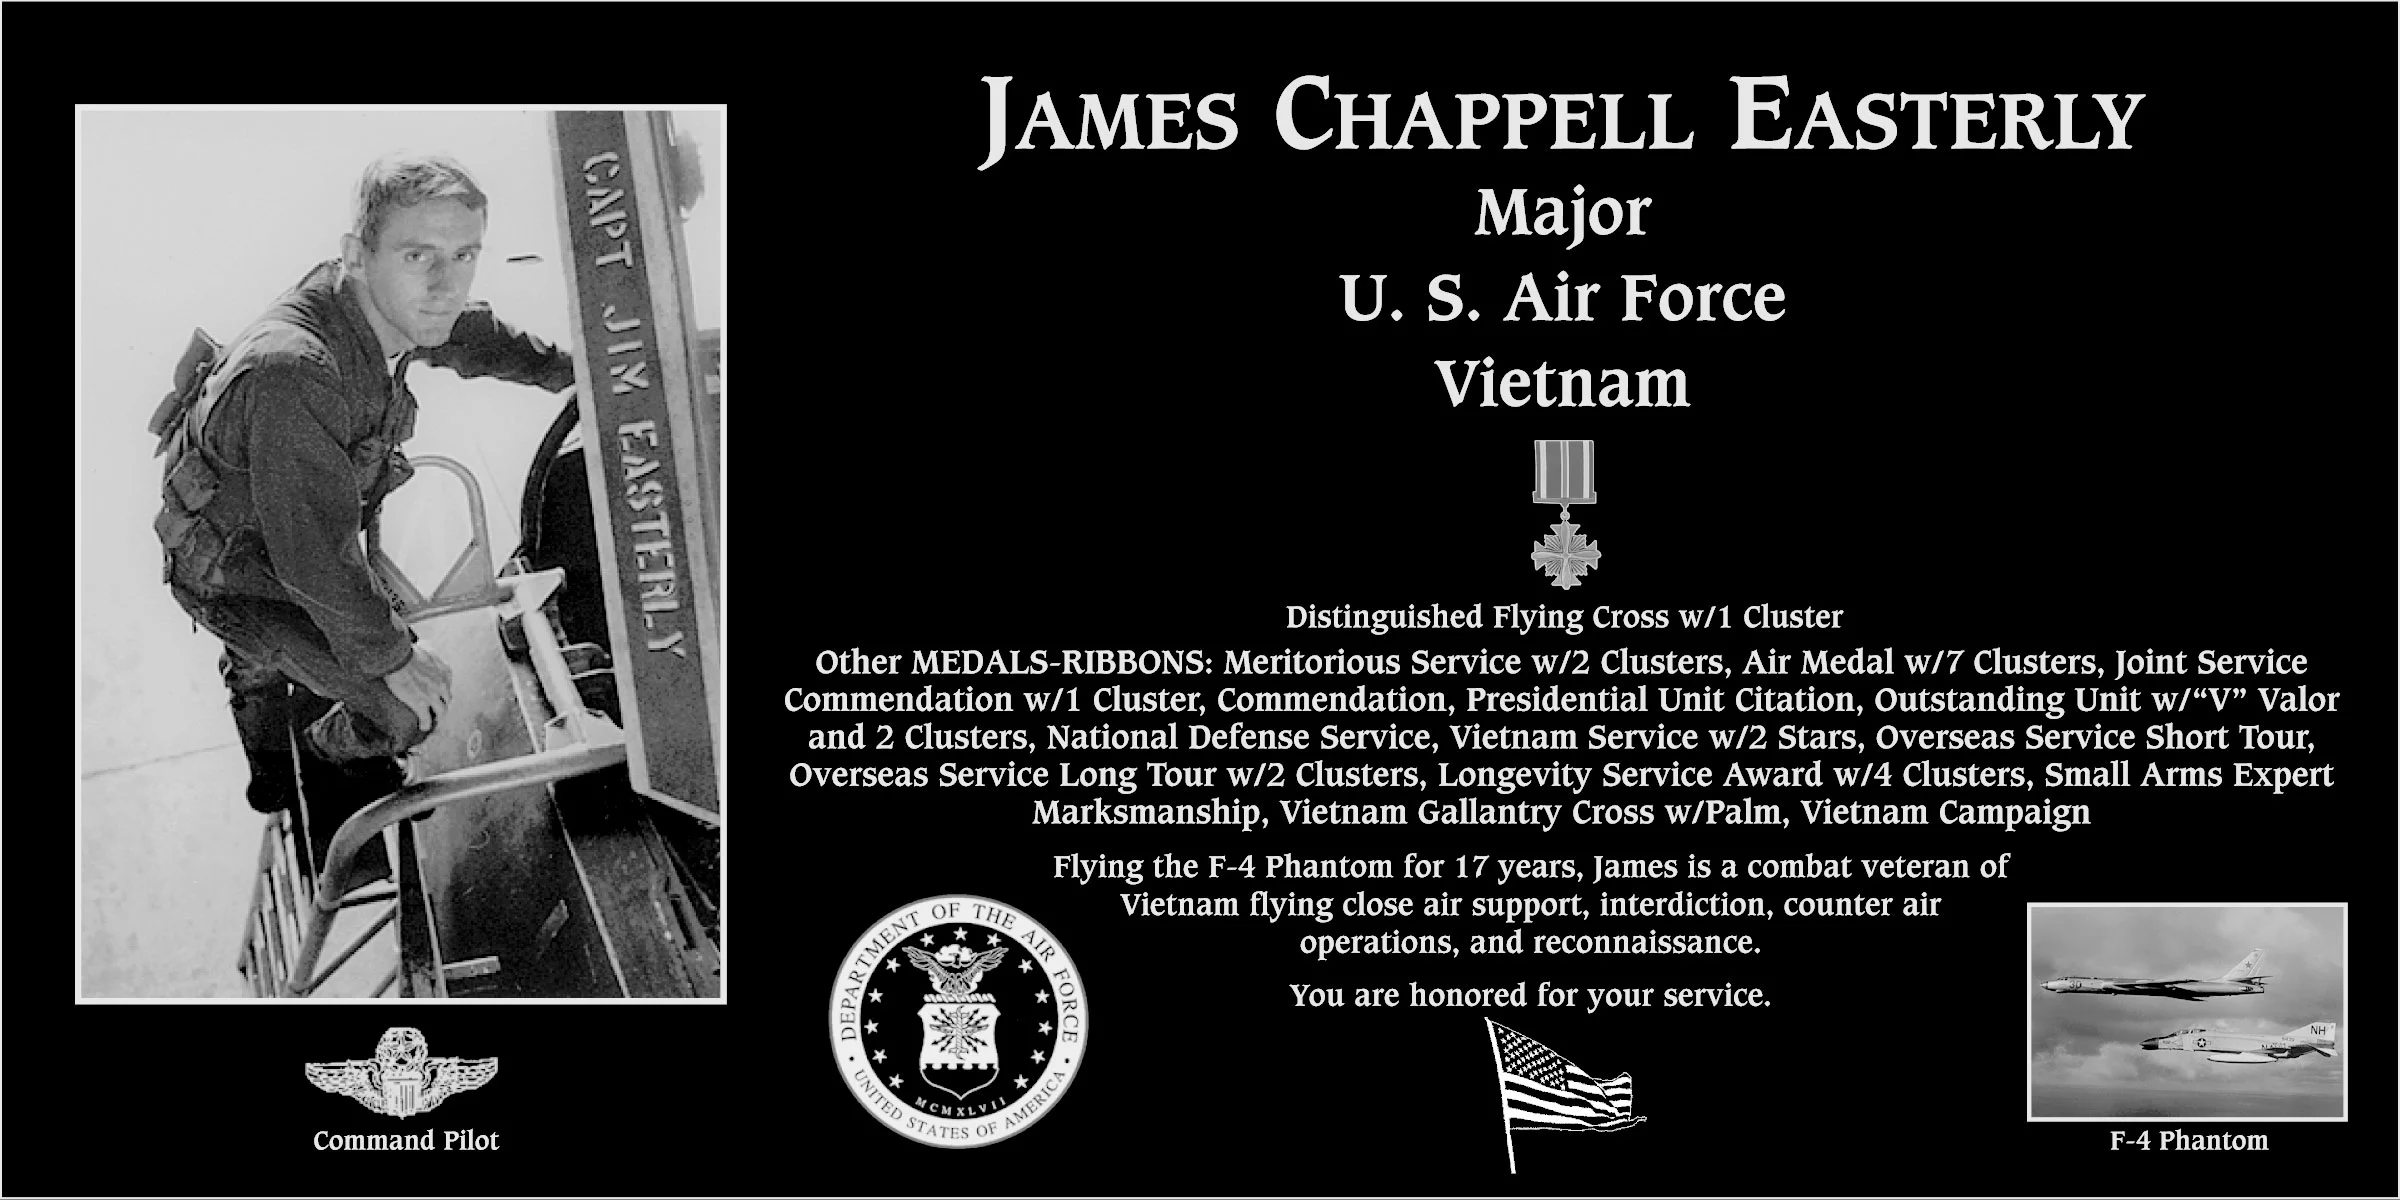 James Chappell Easterly